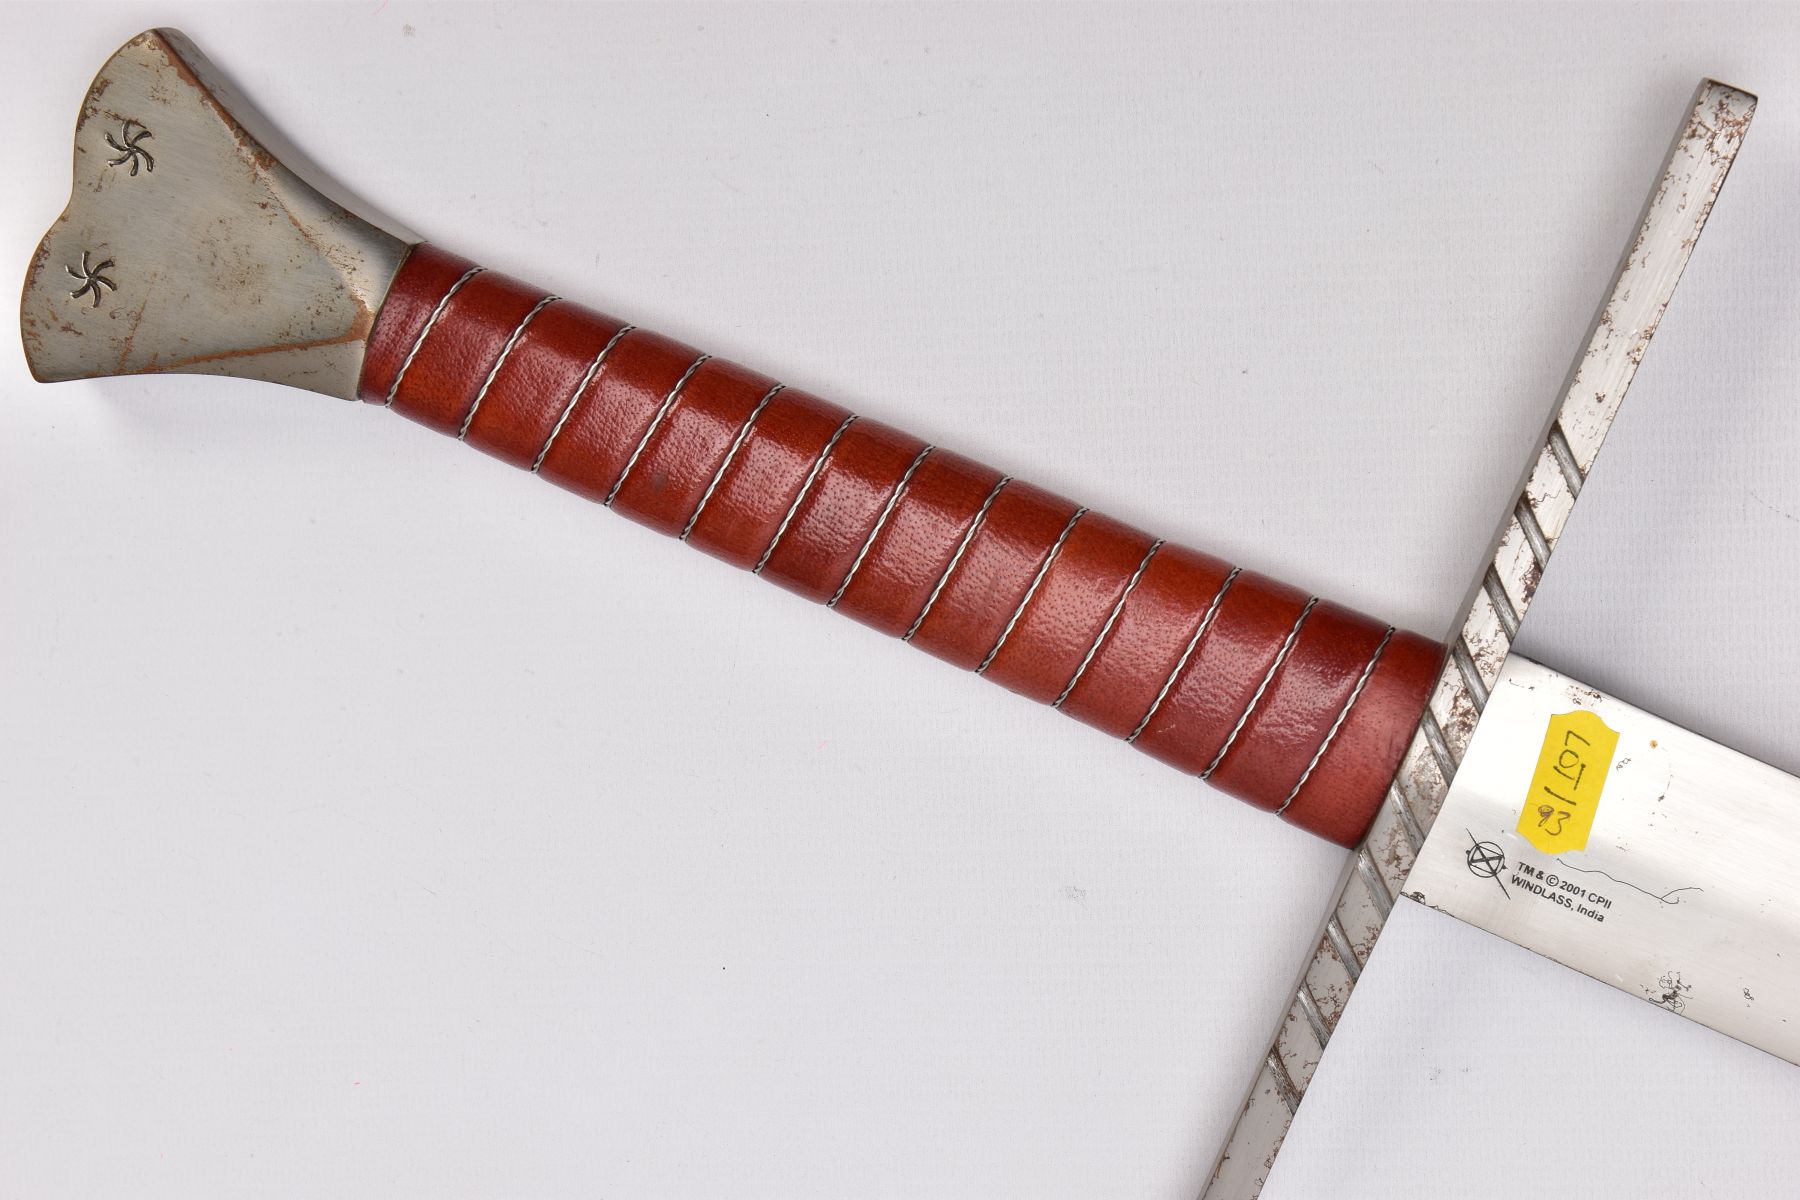 TWO REPLICA COPY SWORDS, a Medieval style sword, with approximately 83cm length blade, slightly - Image 2 of 9